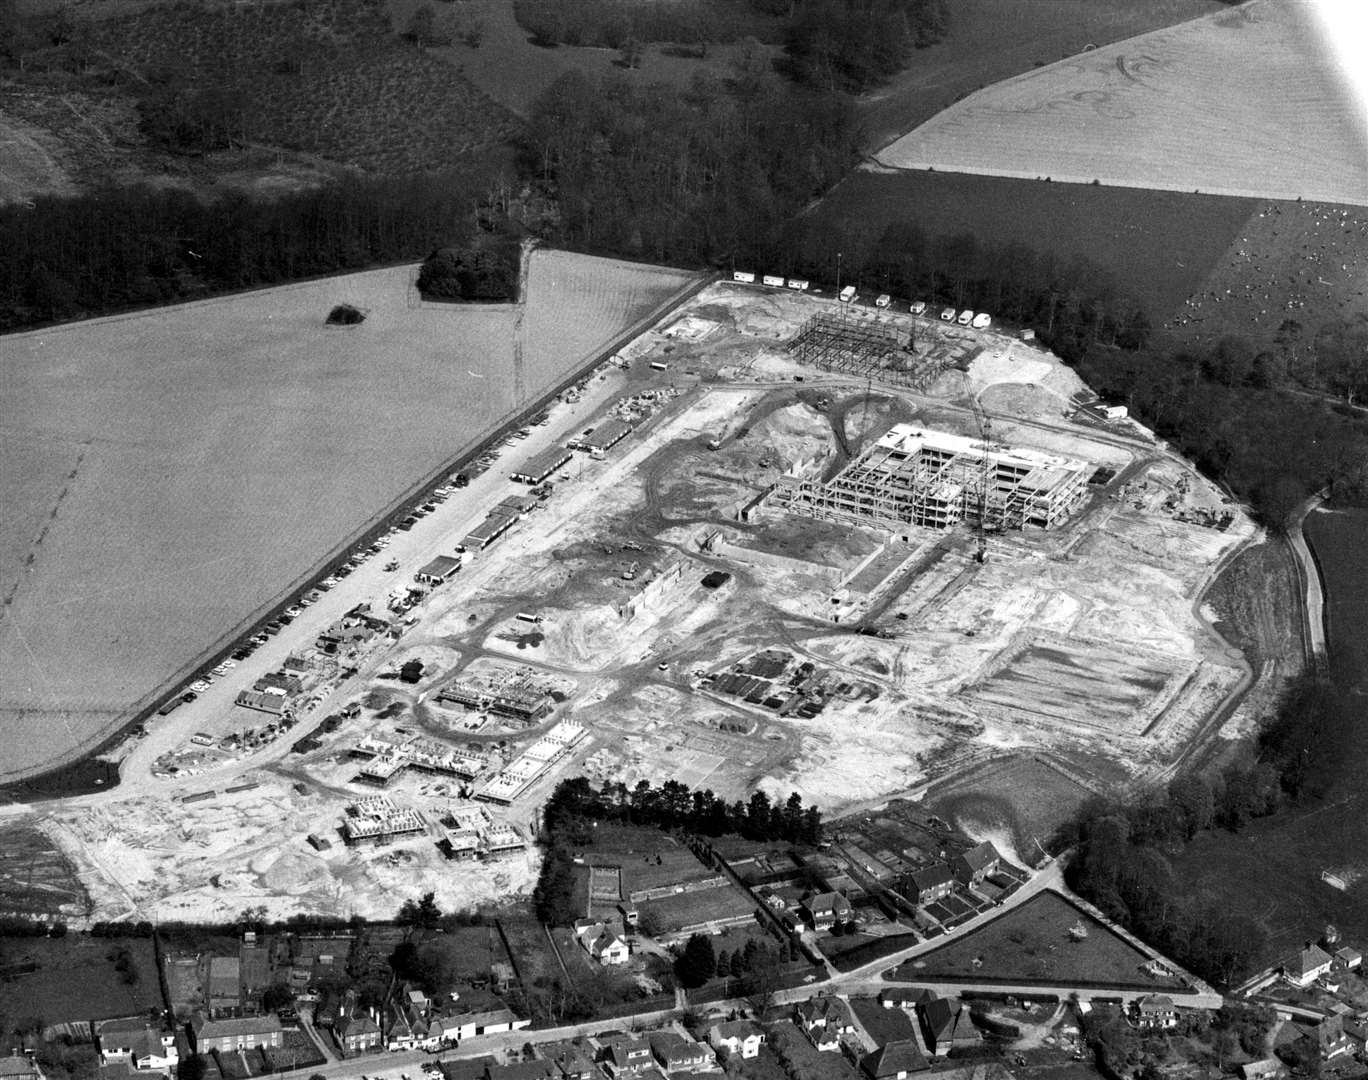 The William Harvey site at Lacton Green, Willesborough, taking shape in 1973. Picture: Steve Salter